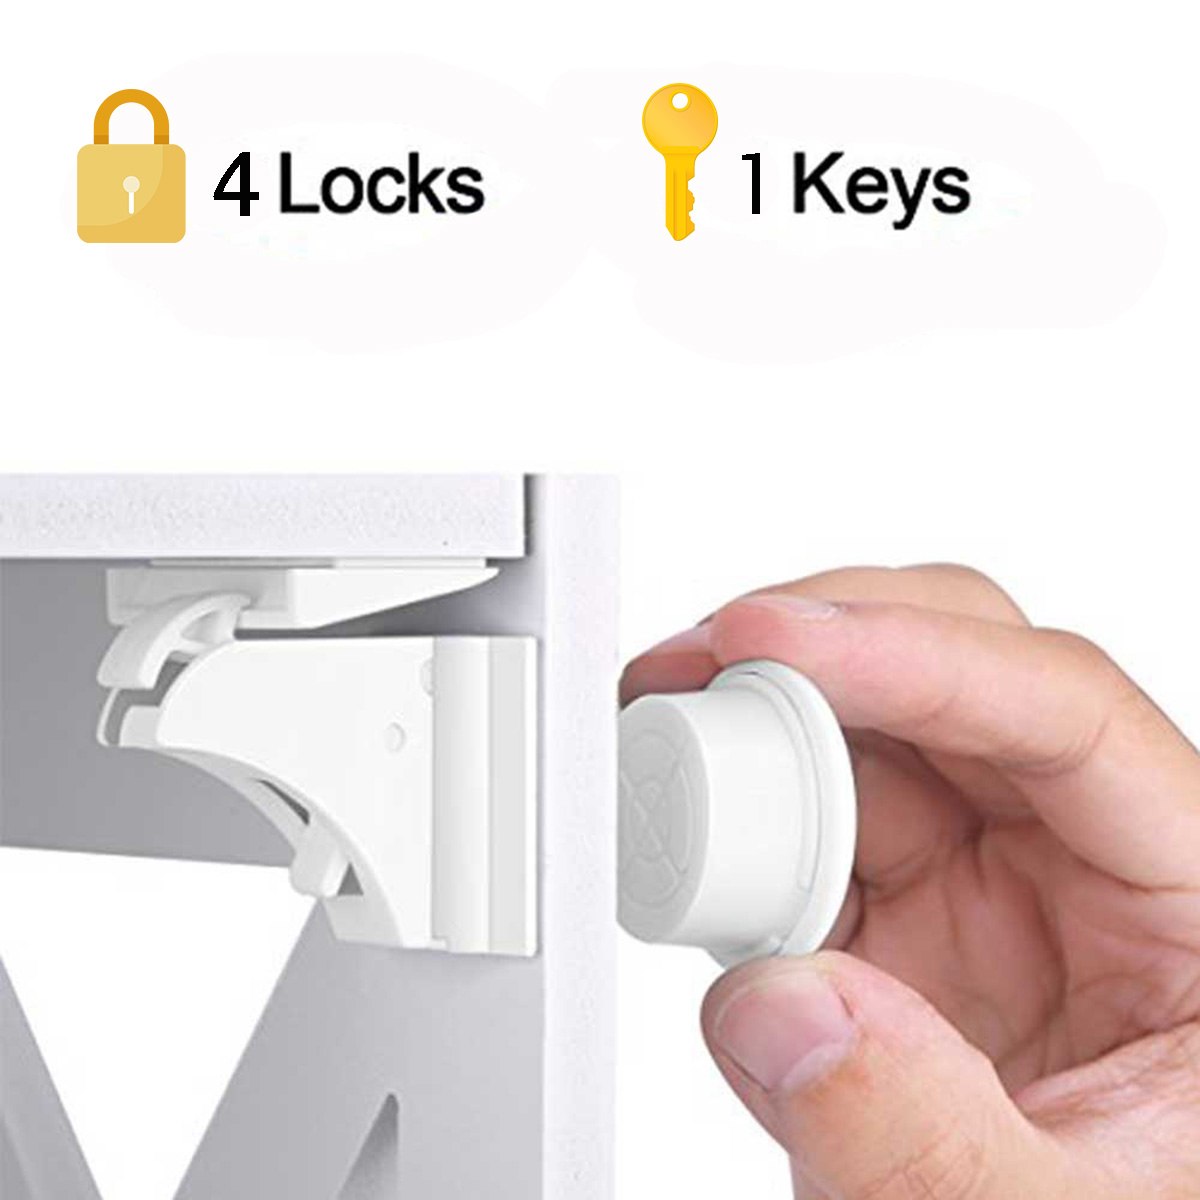 Safety 1st Cabinet Lock - Suitable for all cabinet doors! unisex